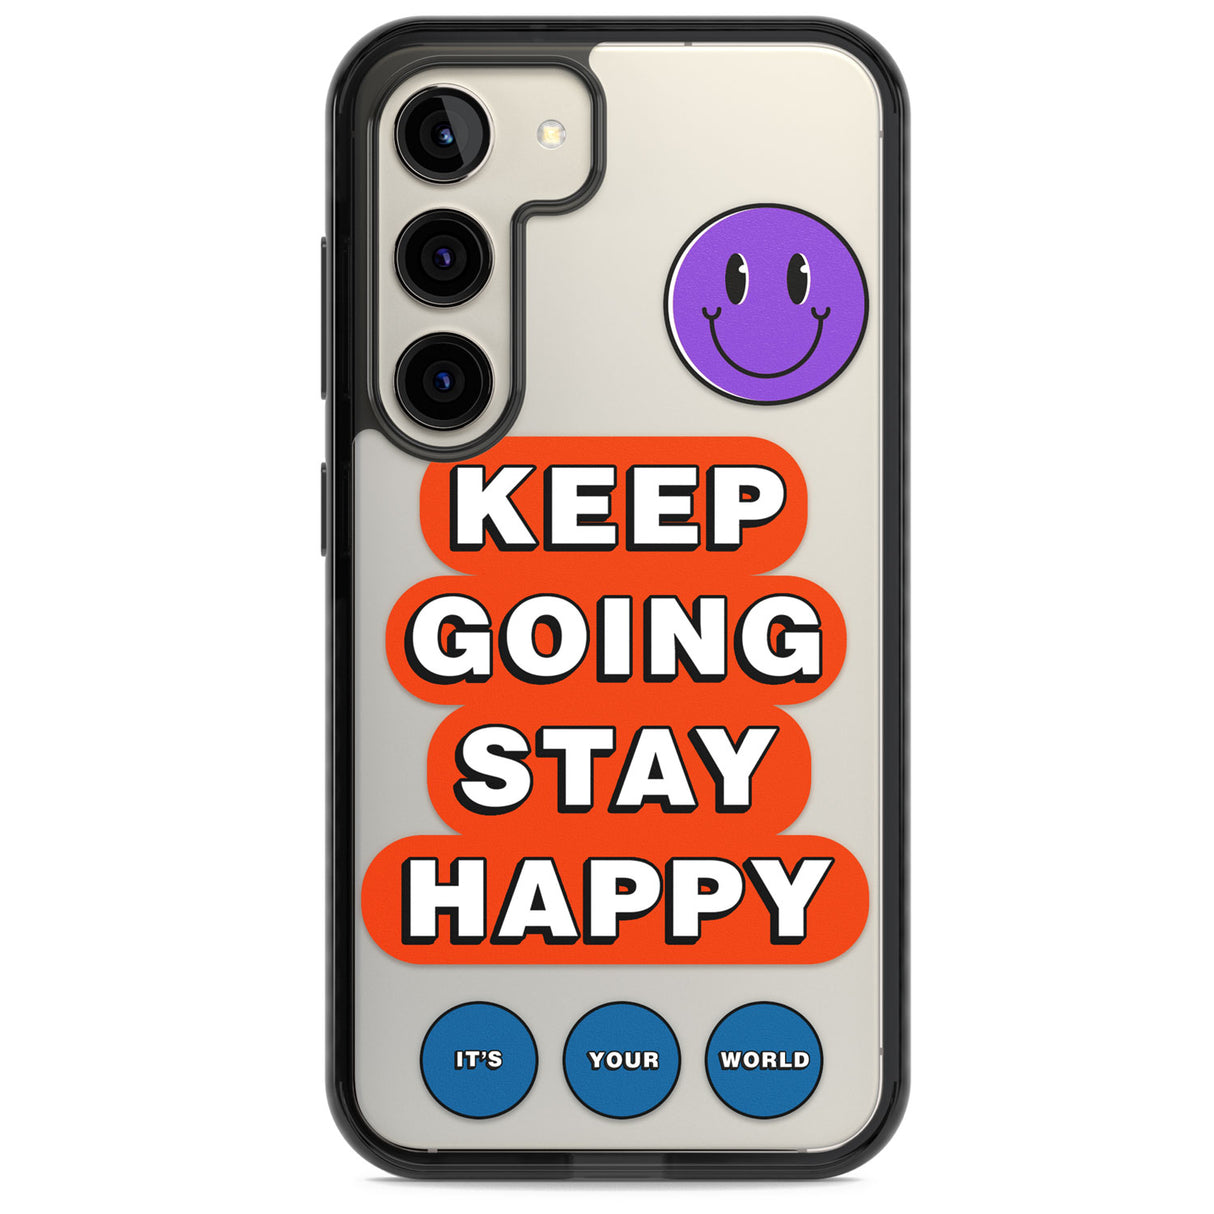 Keep Going Stay Happy Impact Phone Case for Samsung Galaxy S24, Samsung Galaxy S23, Samsung Galaxy S22